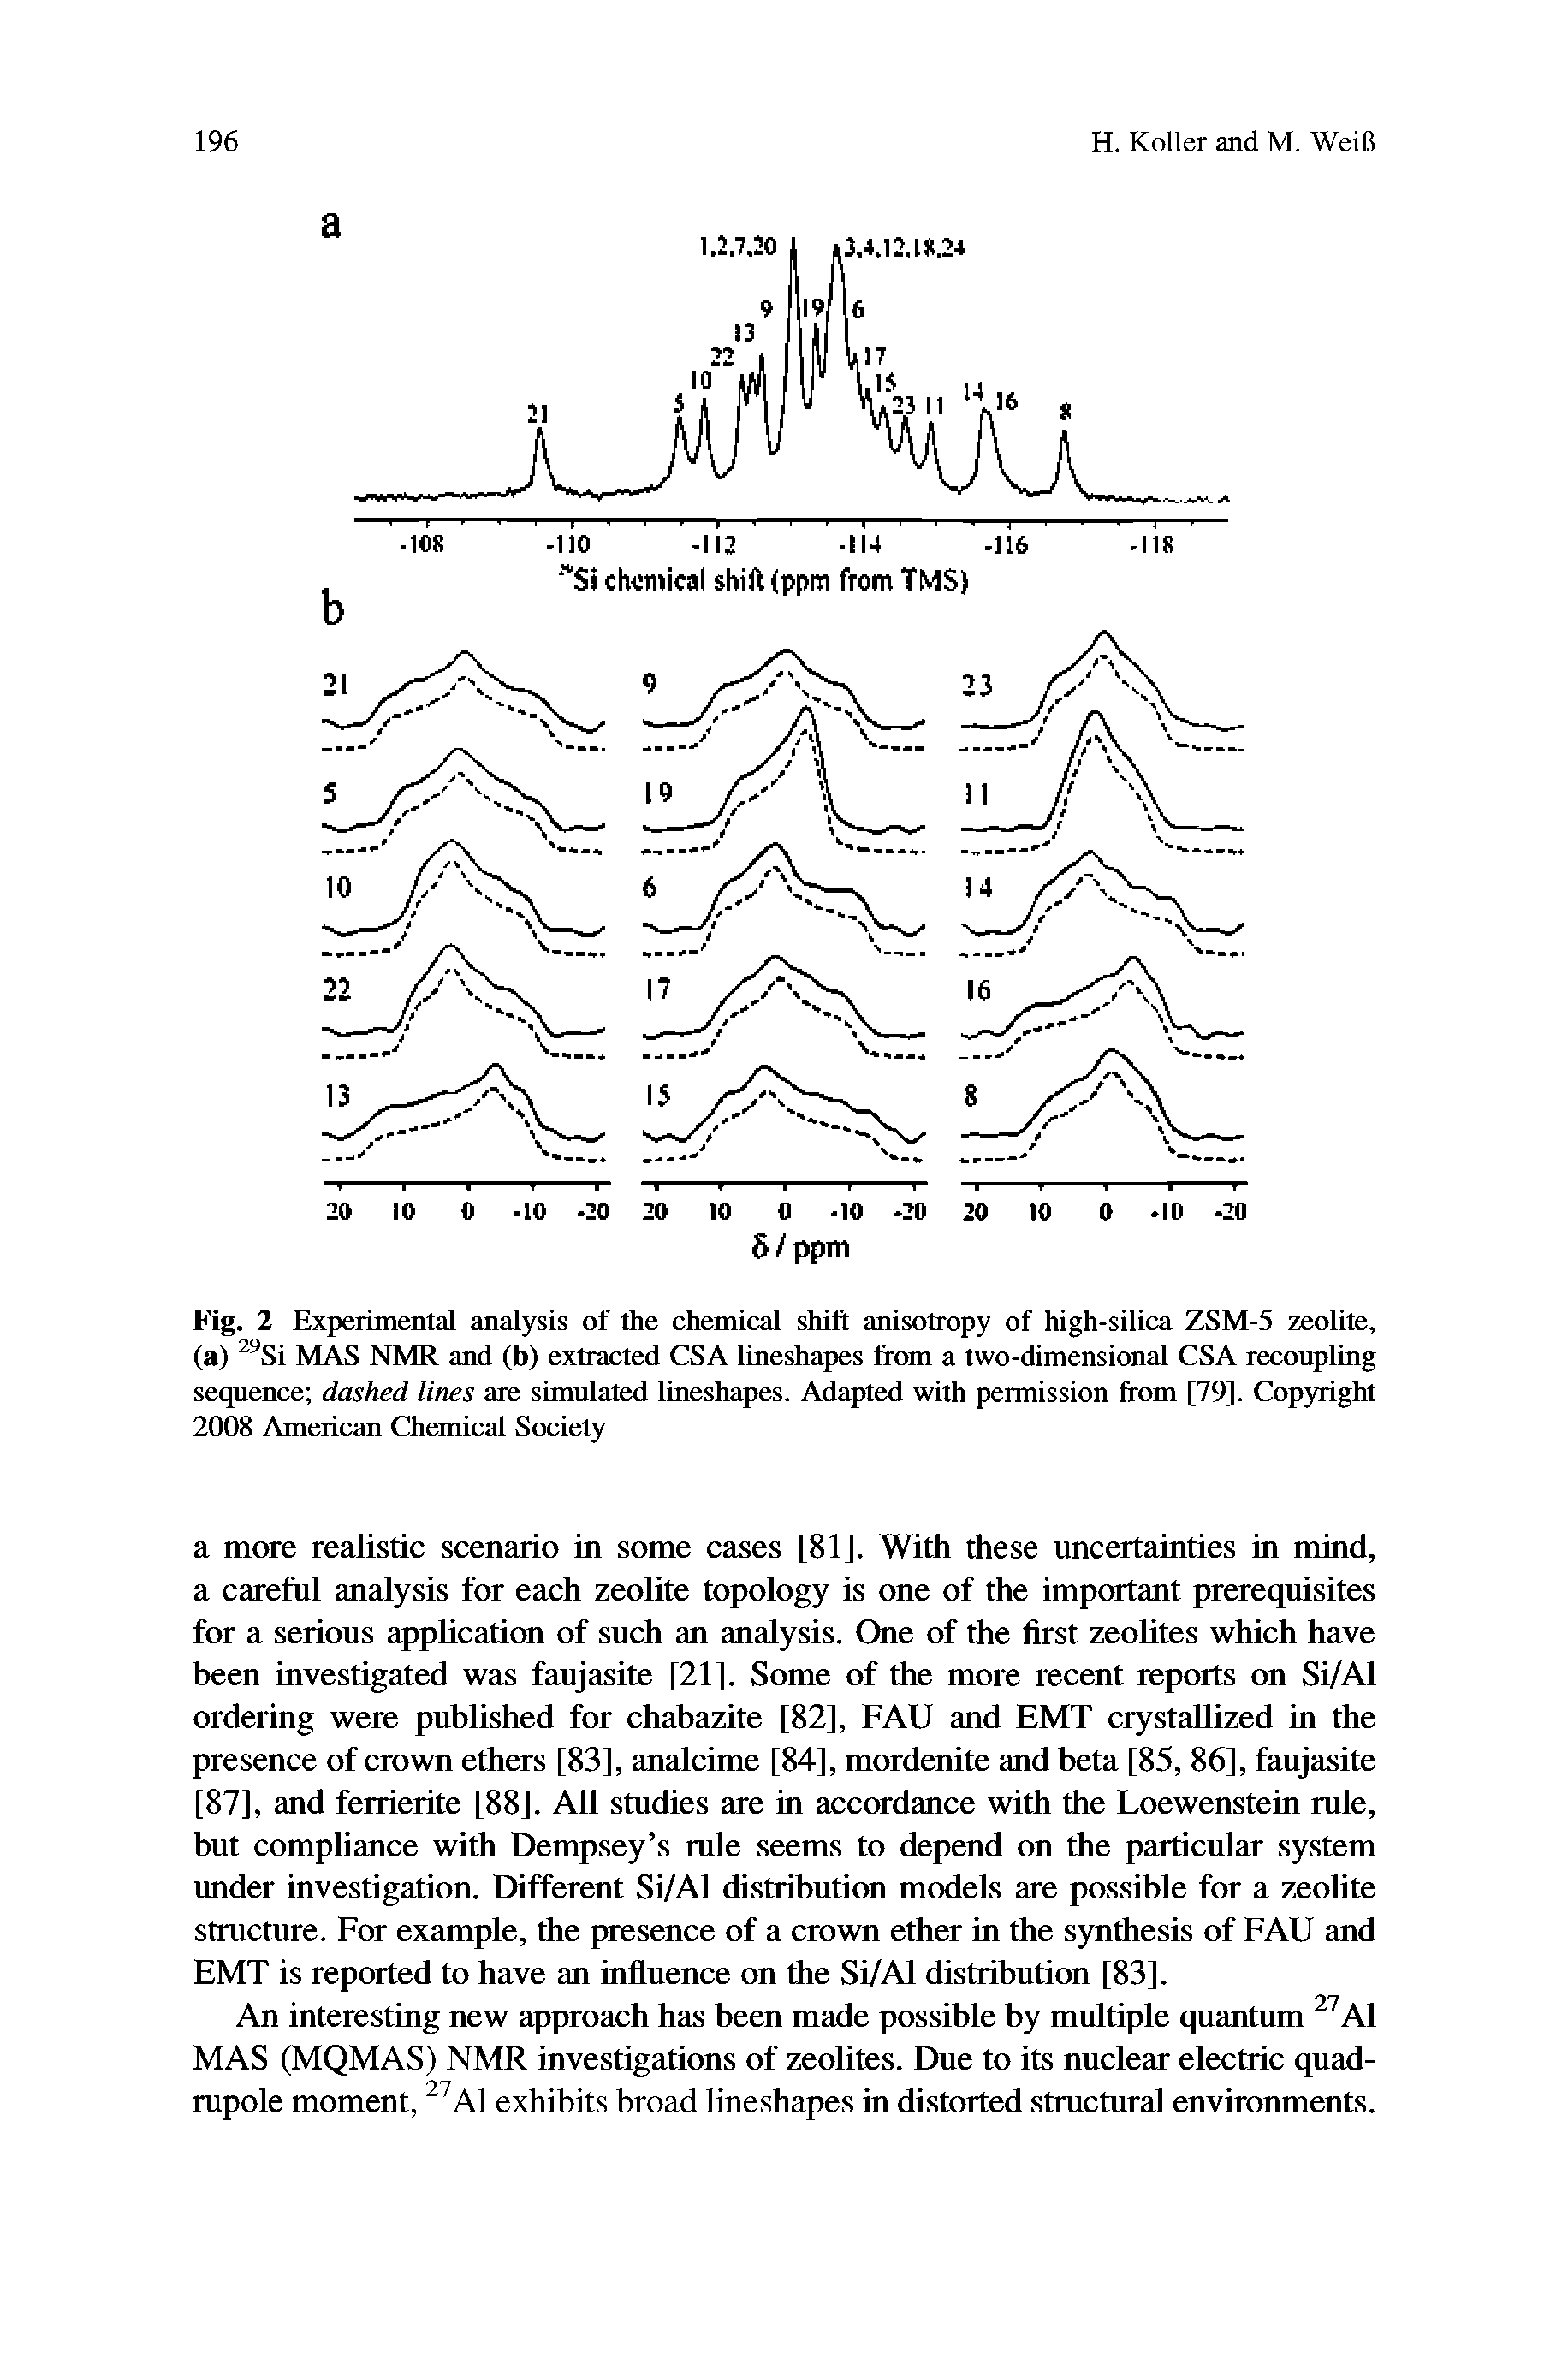 Fig. 2 Experimental analysis of the chemical shift anisotropy of high-silica ZSM-5 zeolite, (a) 29Si MAS NMR and (b) extracted CSA lineshapes from a two-dimensional CSA recoupling sequence dashed lines are simulated lineshapes. Adapted with permission from [79]. Copyright 2008 American Chemical Society...